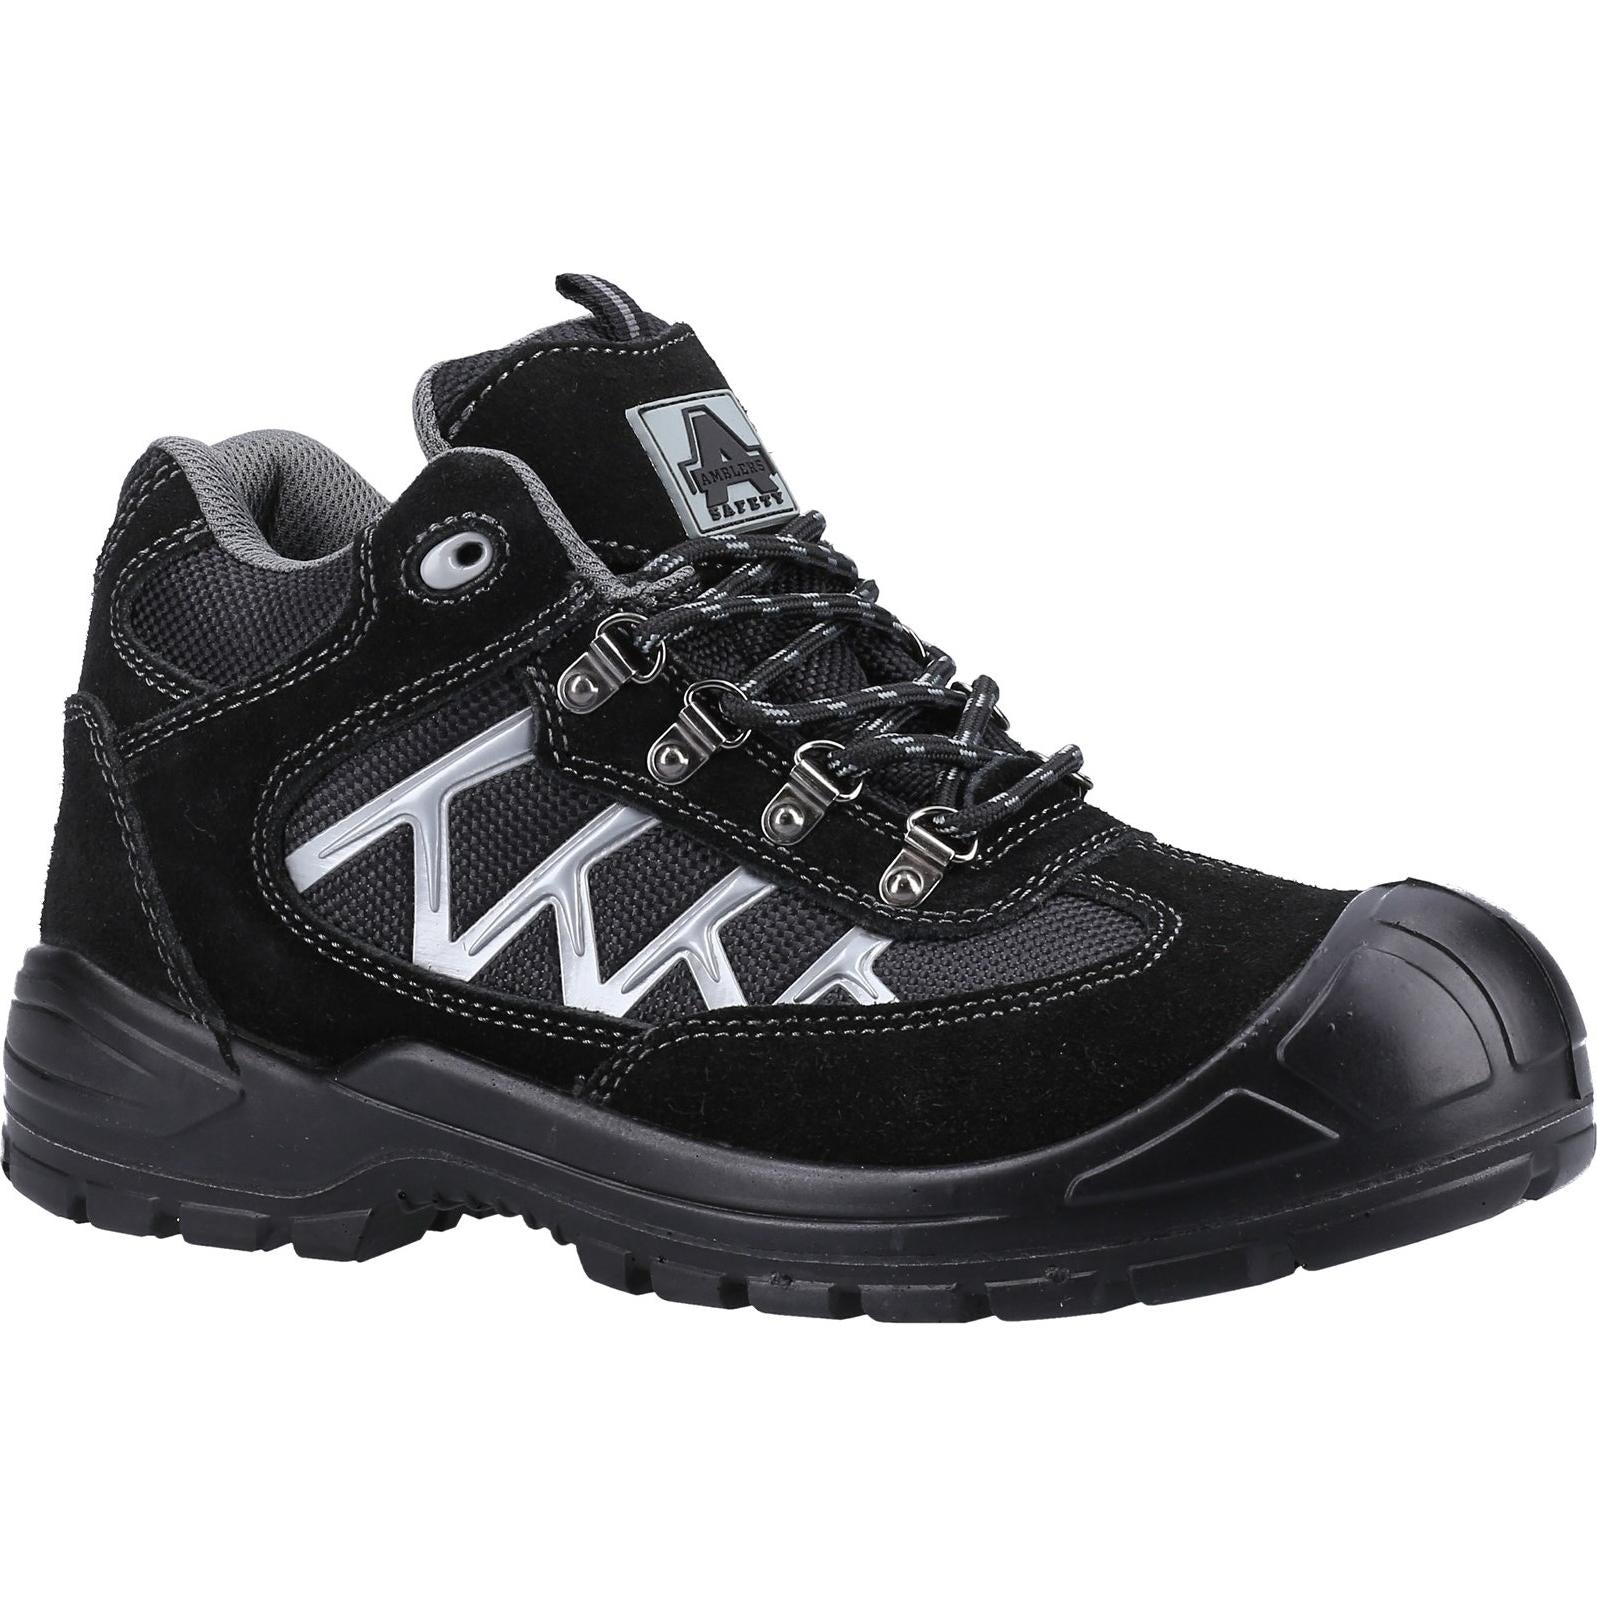 Amblers Safety 255 Safety Boot